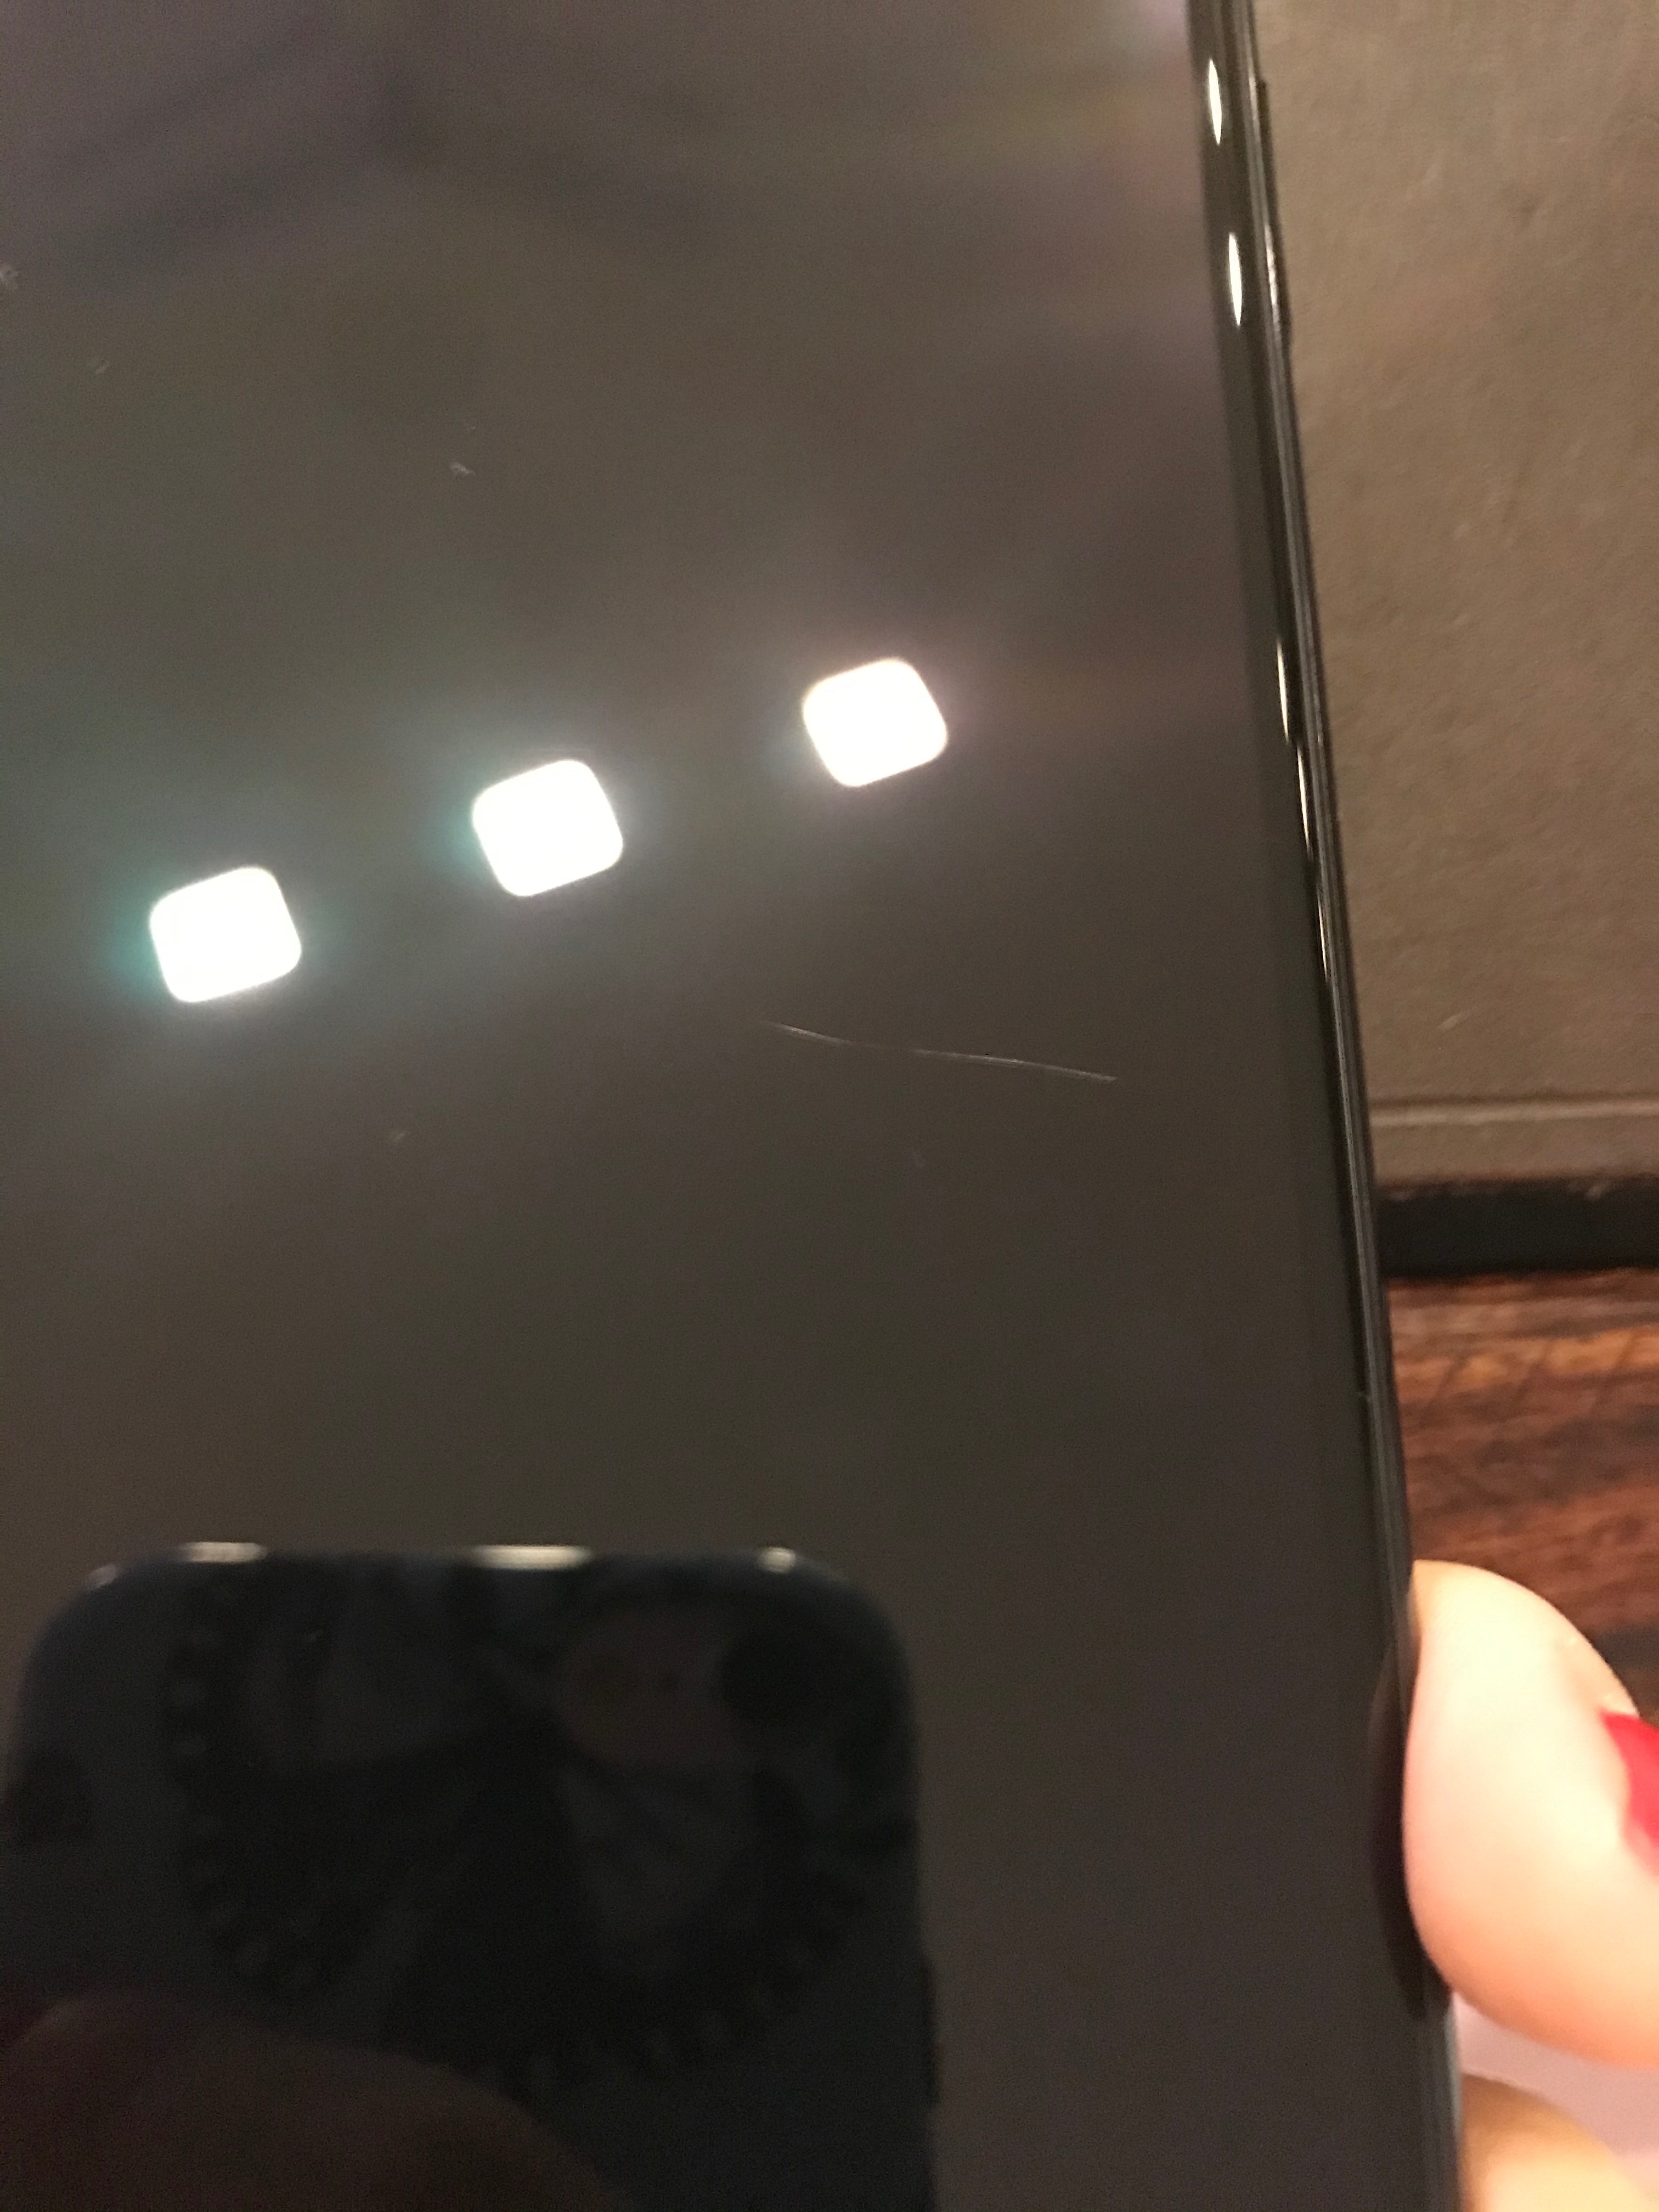 How to remove scratches from an iPhone